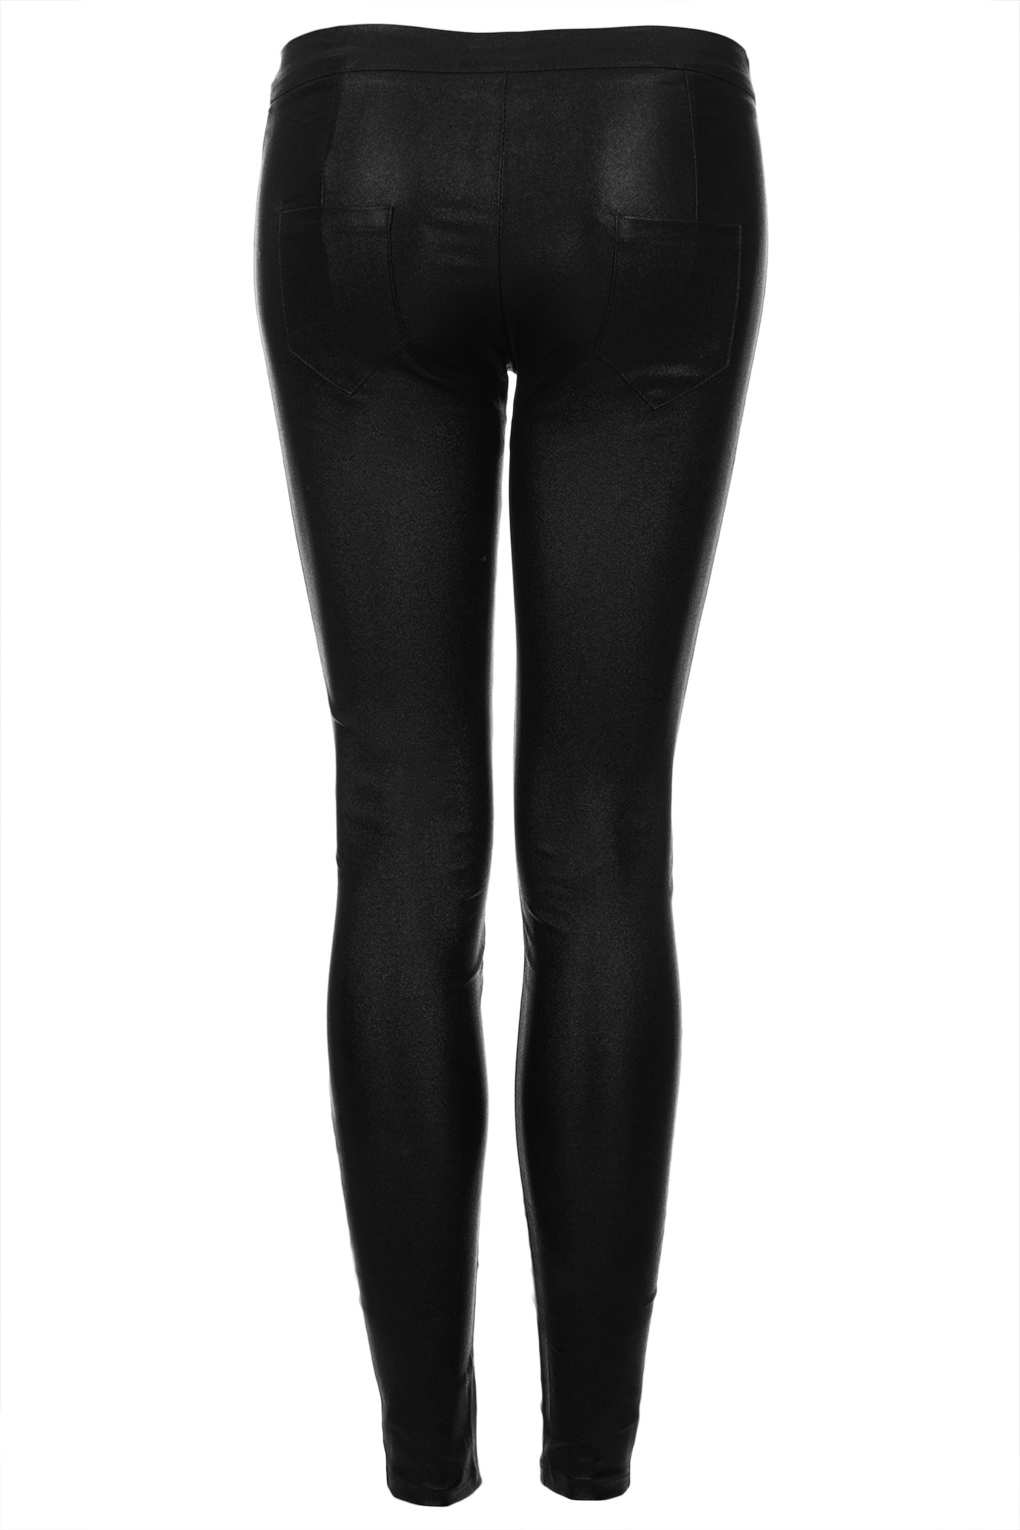 Lyst - Topshop Olivia Disco Pants By Jovonnista in Black